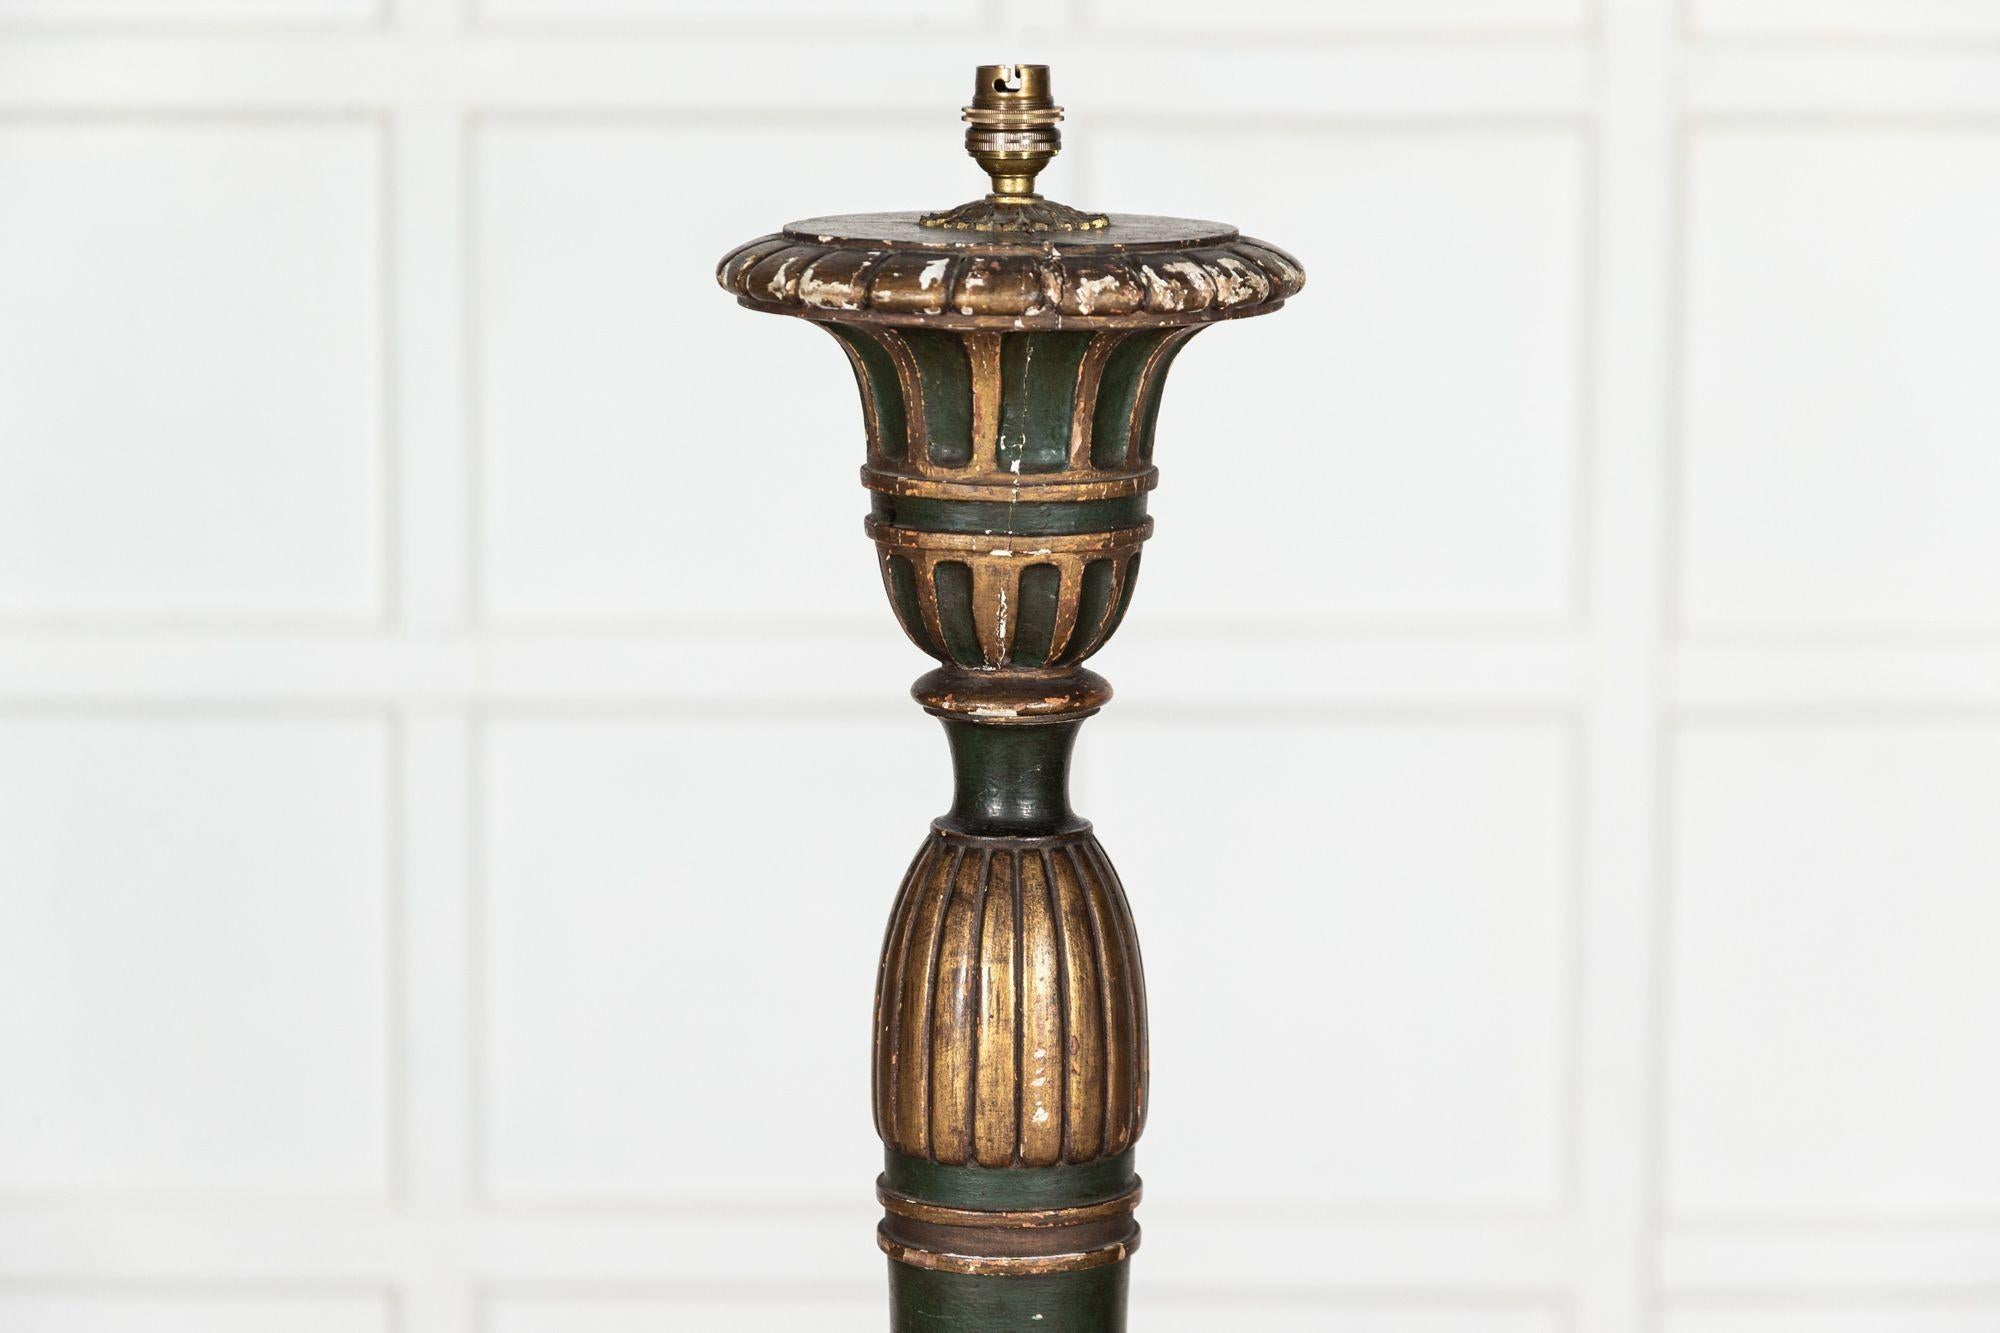 circa 1880
19th Century French gilt & green painted floor lamp
sku 1403
Measures: W42 x D42 x H148 cm.